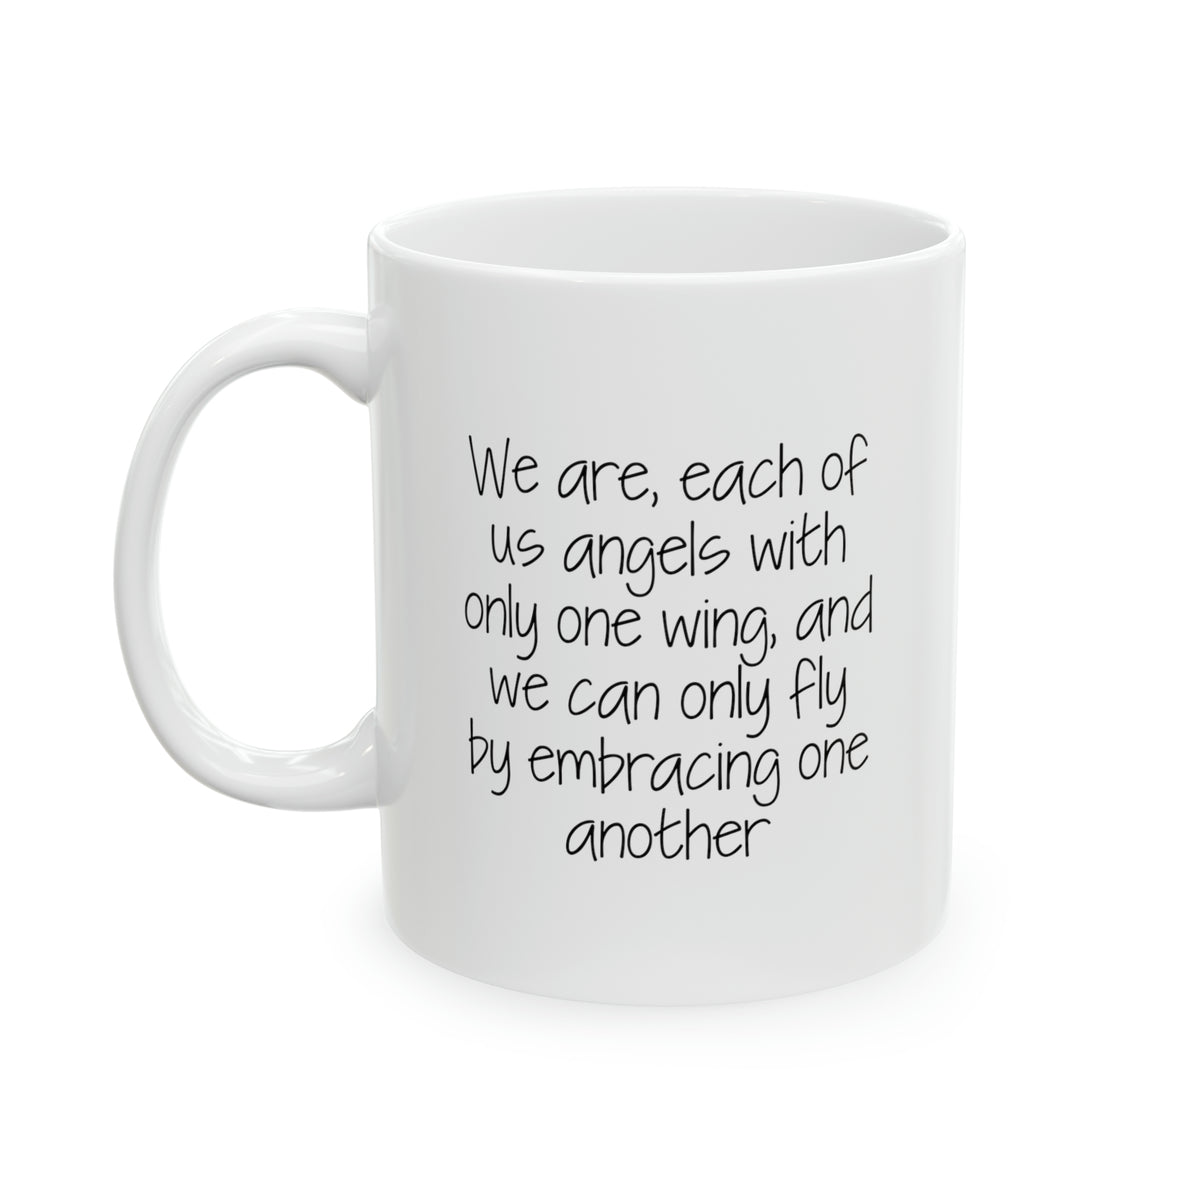 Funny Valentine’s Day Love Coffee Mug - We are angels with only one wing - Gift For Husband Wife Men Women